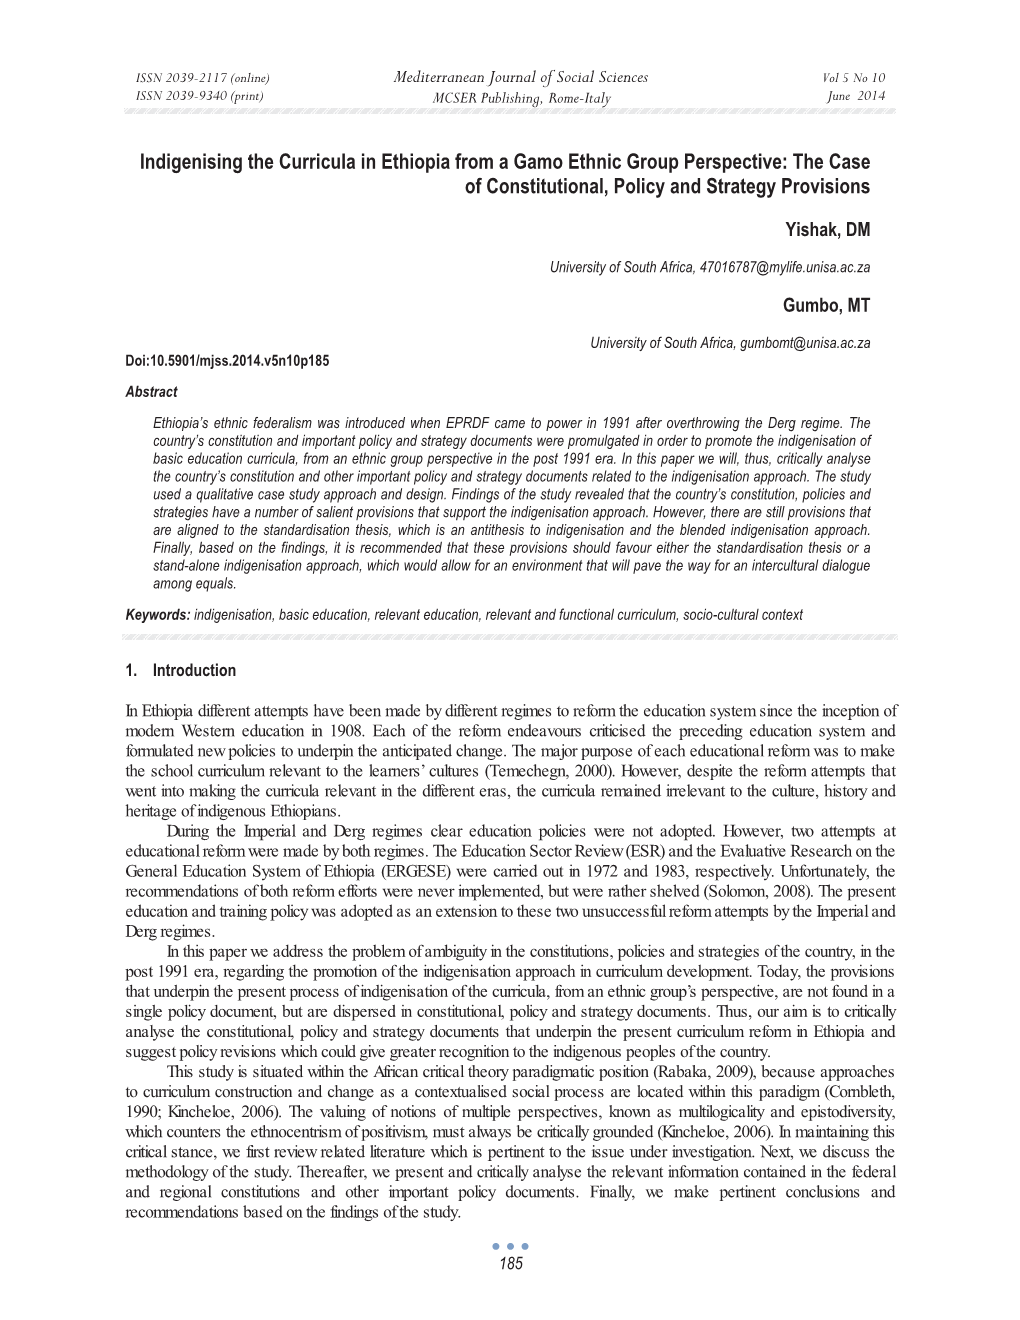 Indigenising the Curricula in Ethiopia from a Gamo Ethnic Group Perspective: the Case of Constitutional, Policy and Strategy Provisions